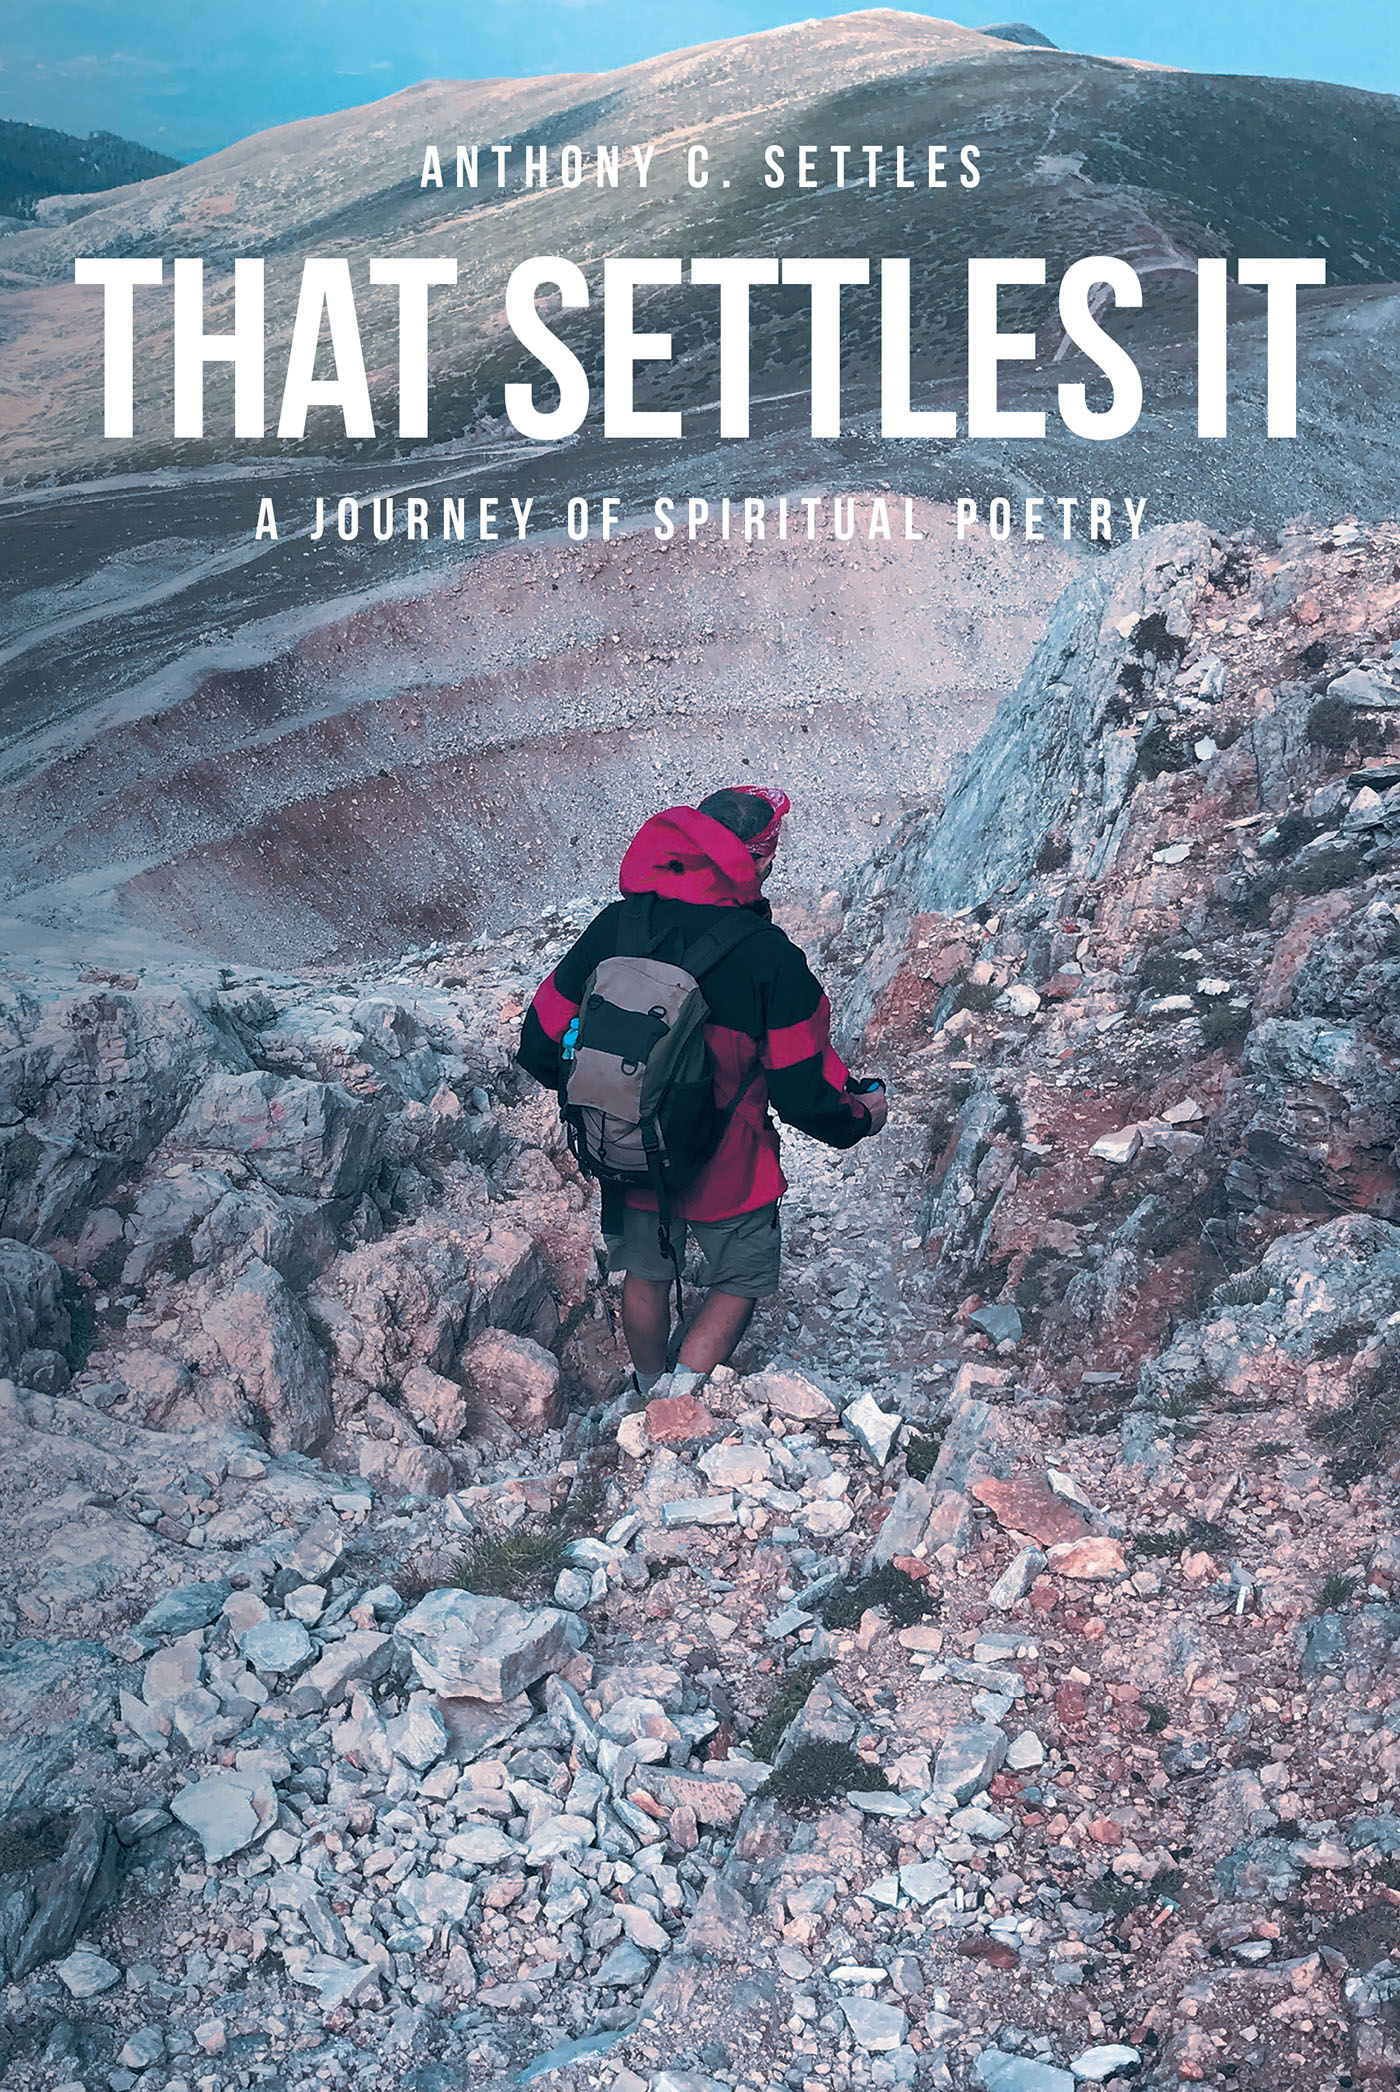 Anthony C. Settles’s Newly Released "That Settles It: A Journey of Spiritual Poetry" is a Spiritually Driven Collection of Impactful Verse